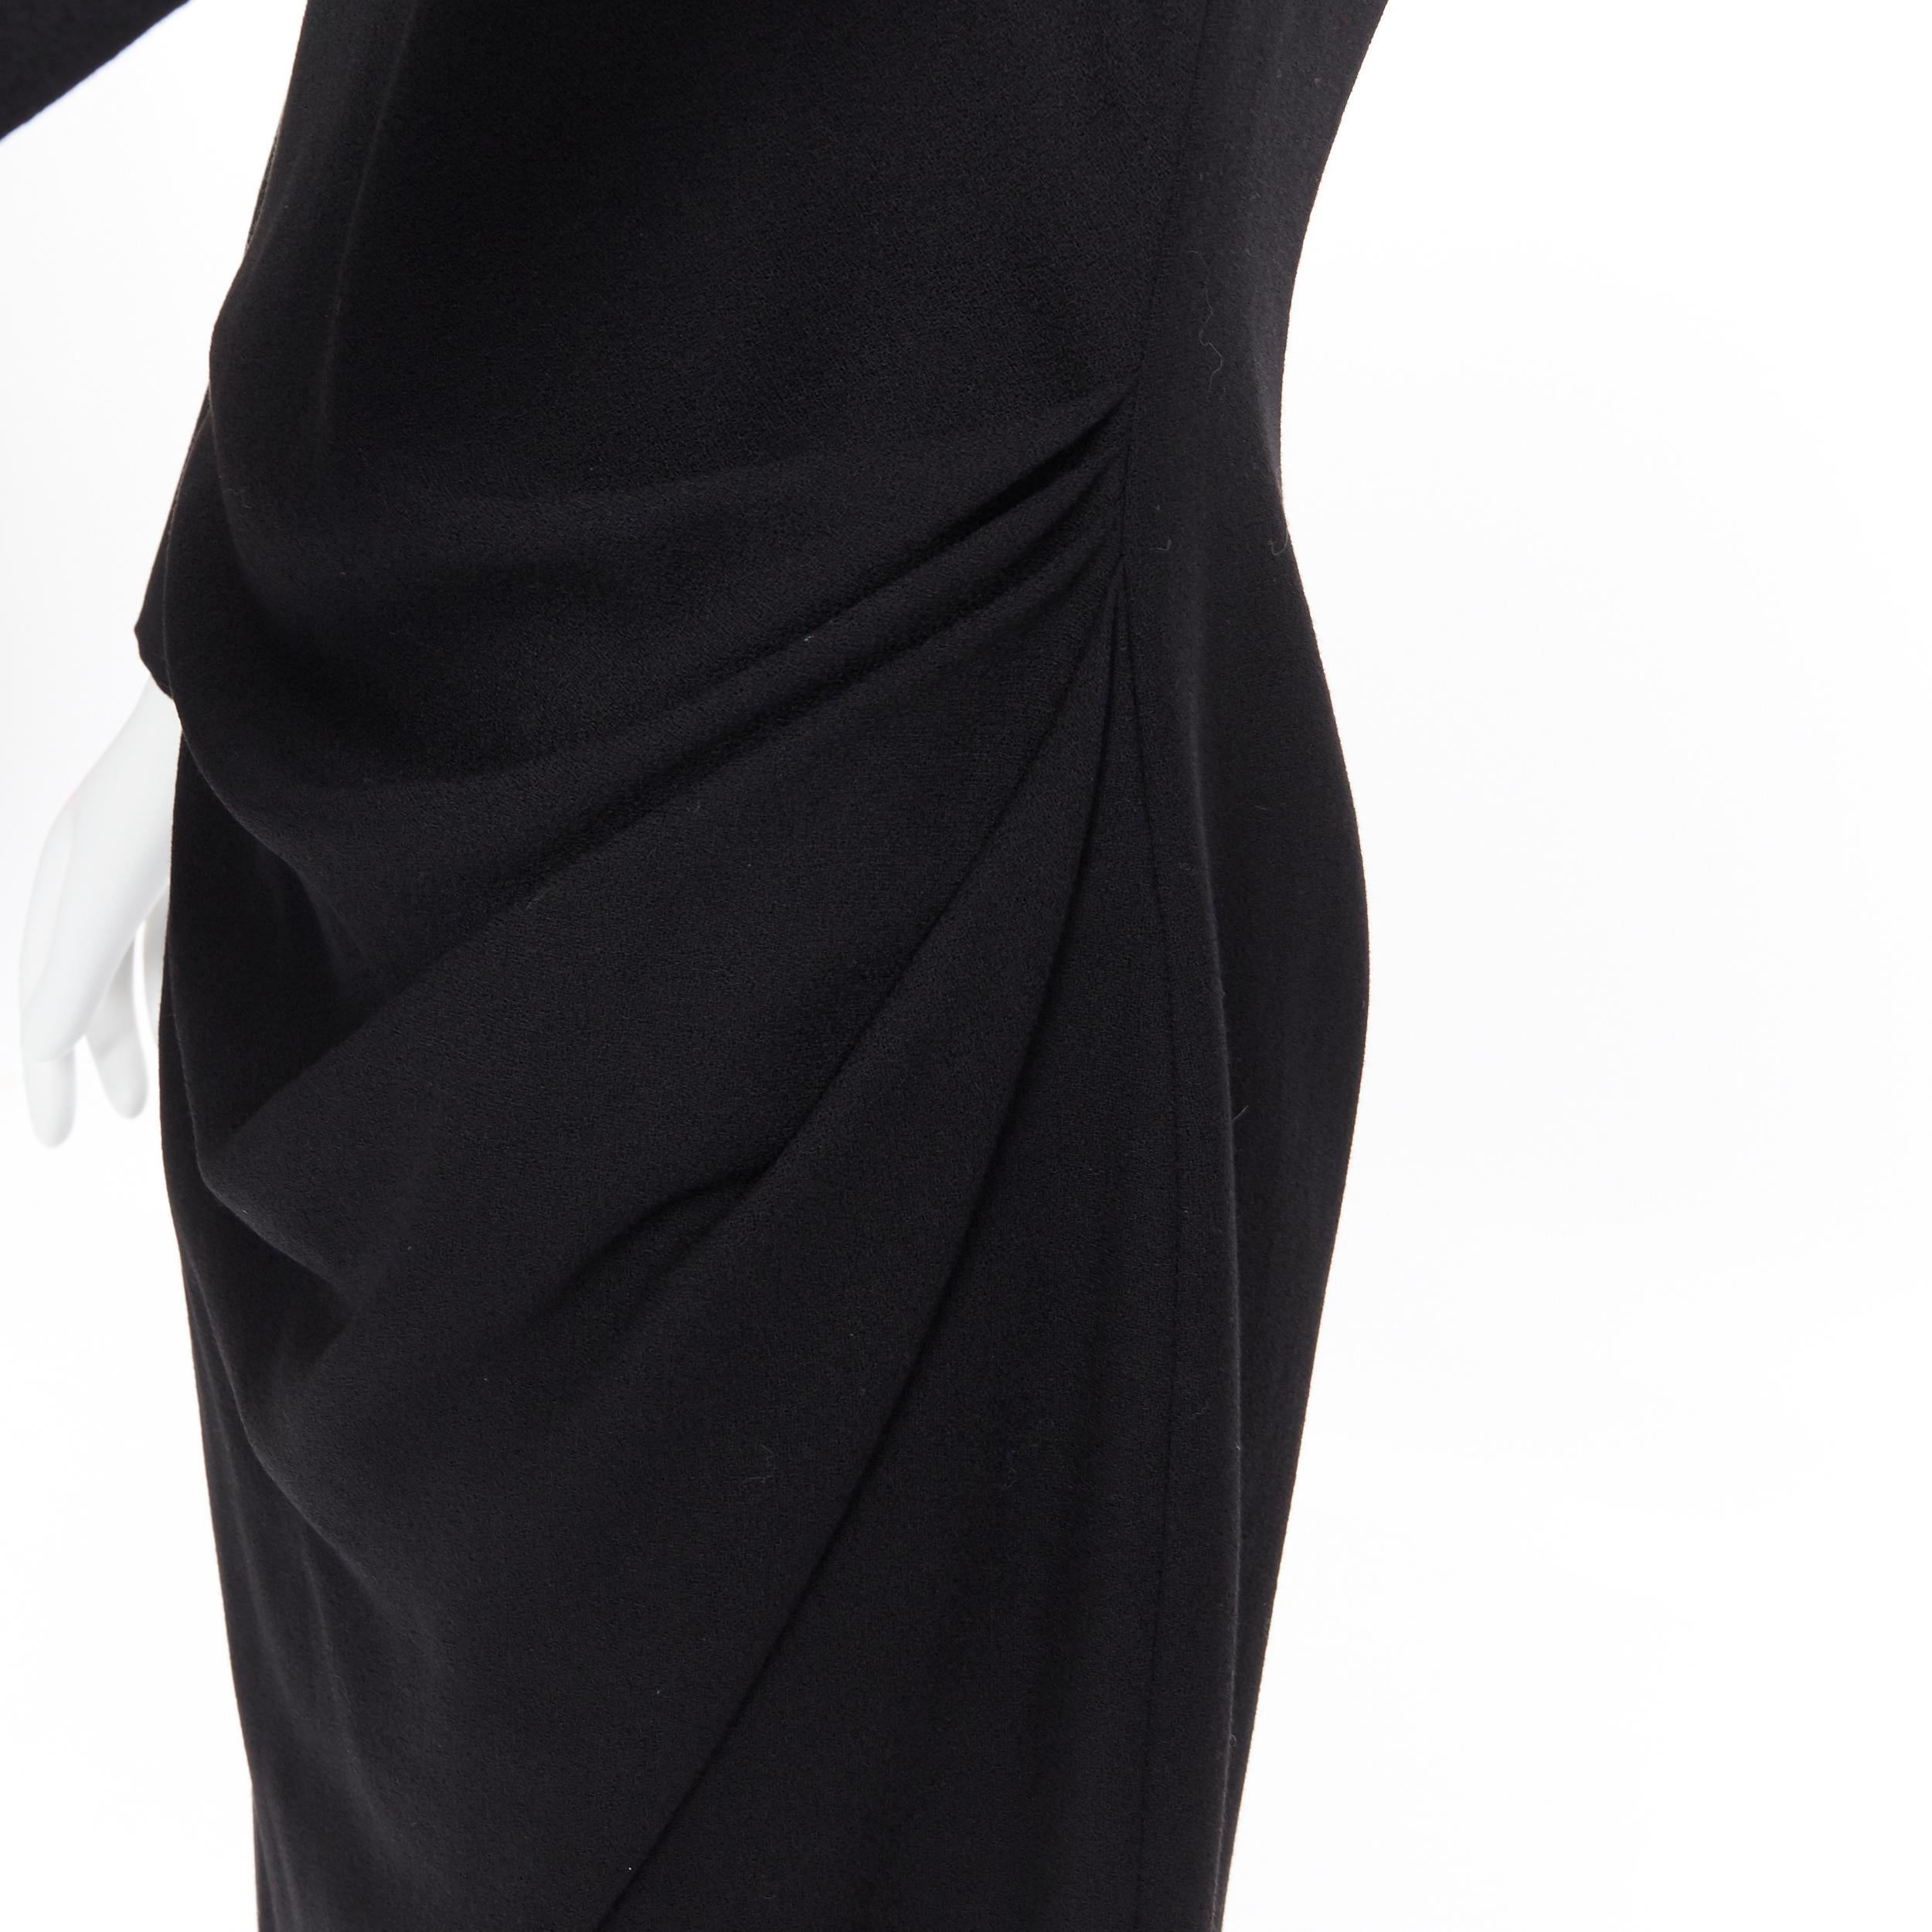 ALEXANDER MCQUEEN 100% wool black cowl neck draped waist knee length dress IT44
Brand: Alexander McQueen
Model Name / Style: Draped dress
Material: Wool
Color: Black
Pattern: Solid
Closure: Zip
Extra Detail: Draped detail at waist. 3/4 sleeve. Cowl